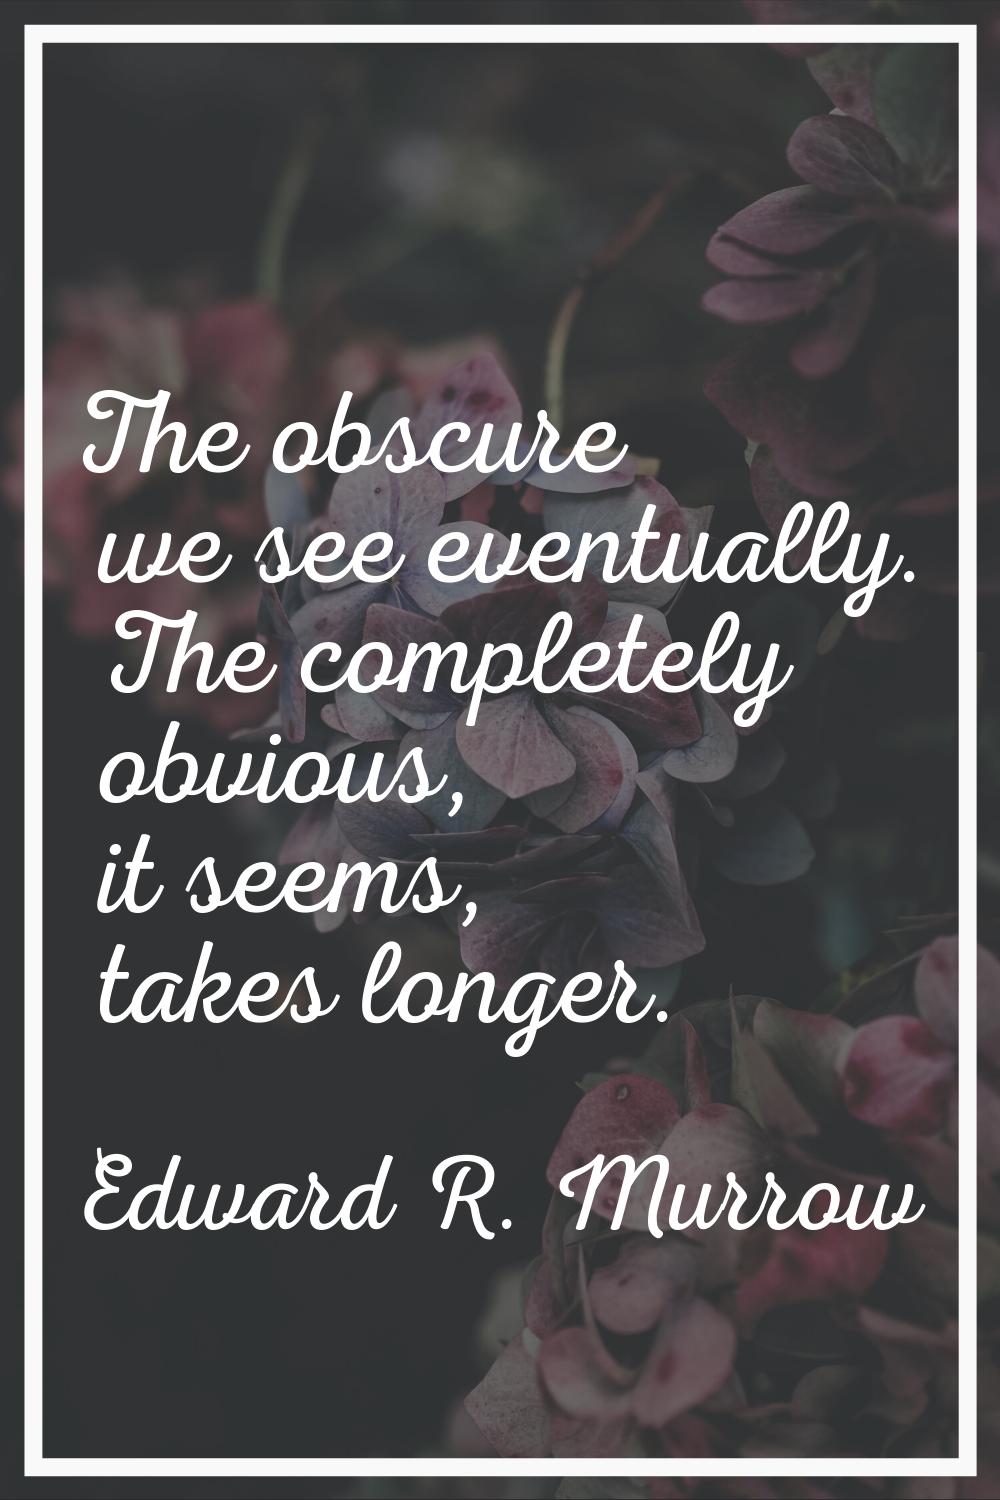 The obscure we see eventually. The completely obvious, it seems, takes longer.